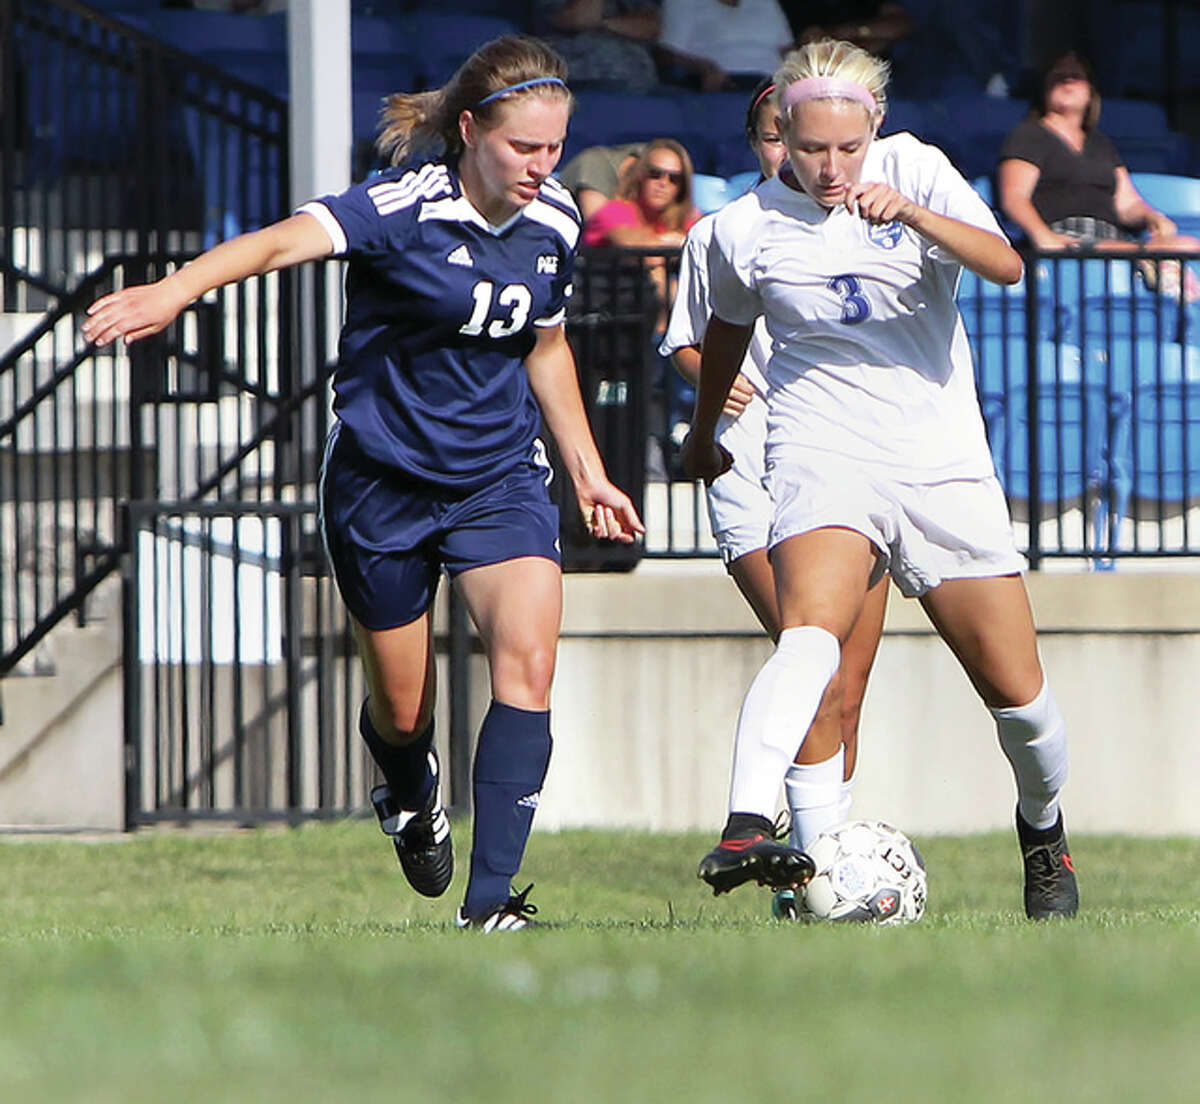 Lewis and Clark’s Nicole Howard, right, scored three goals and added an assist during the Trailblazers’ two-game Florida trip over Labor Day weekend. She is shown in action earlier this season.